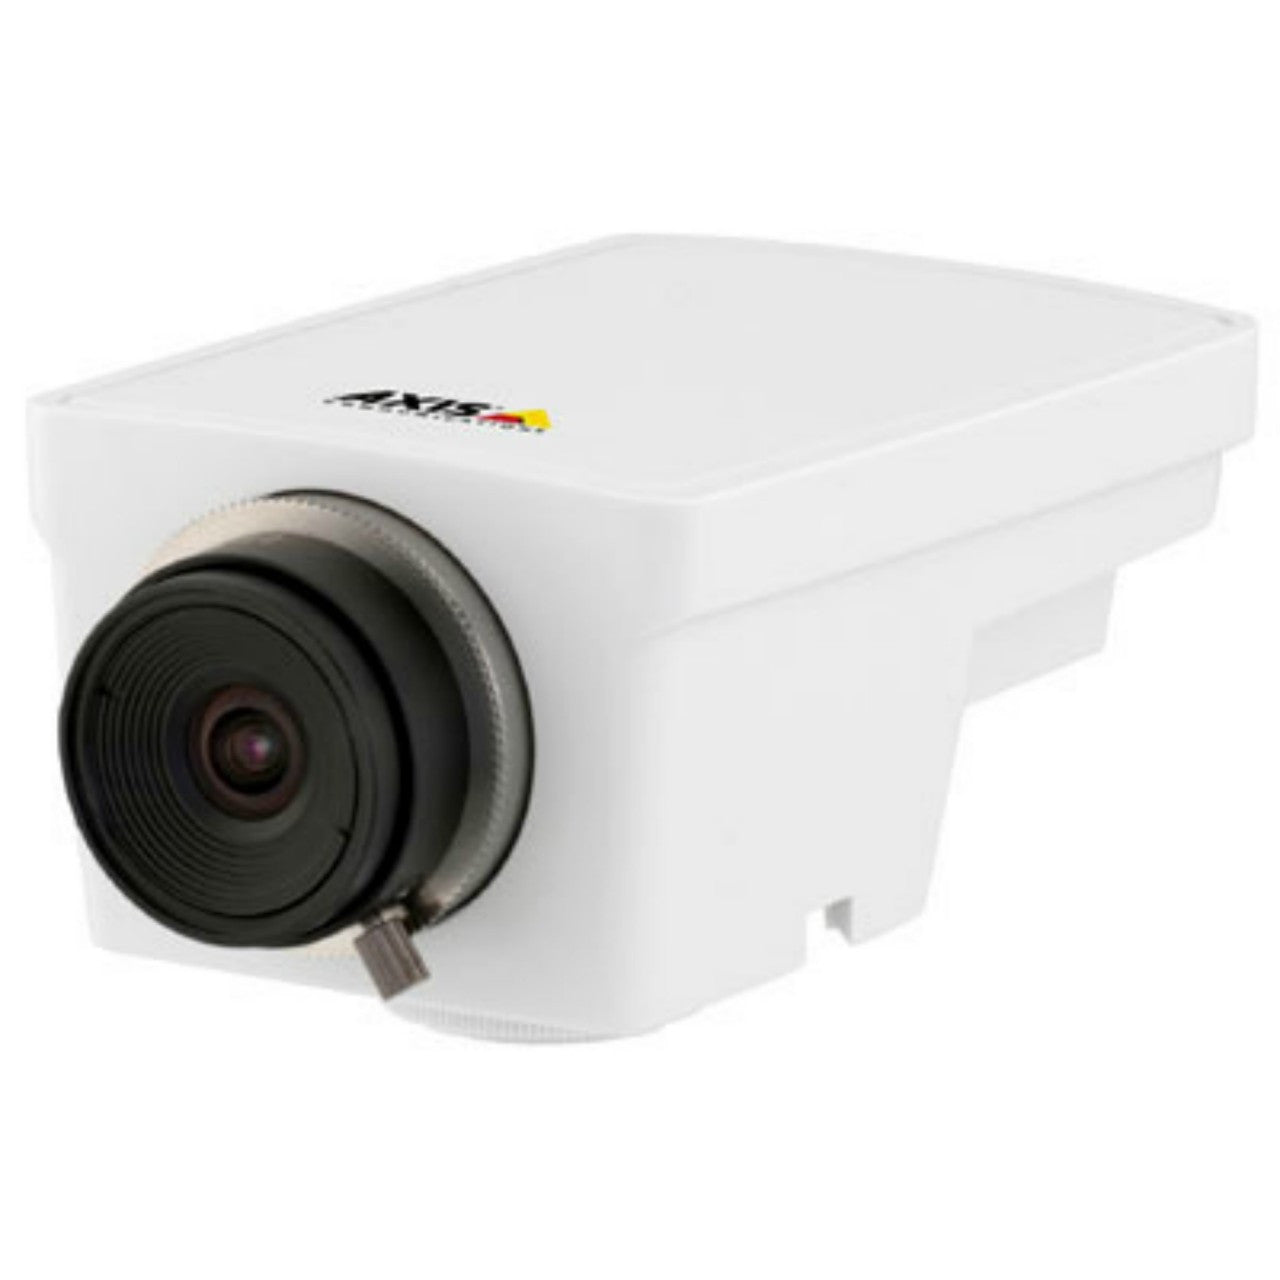 AXIS M1104 Compact Network IP Camera